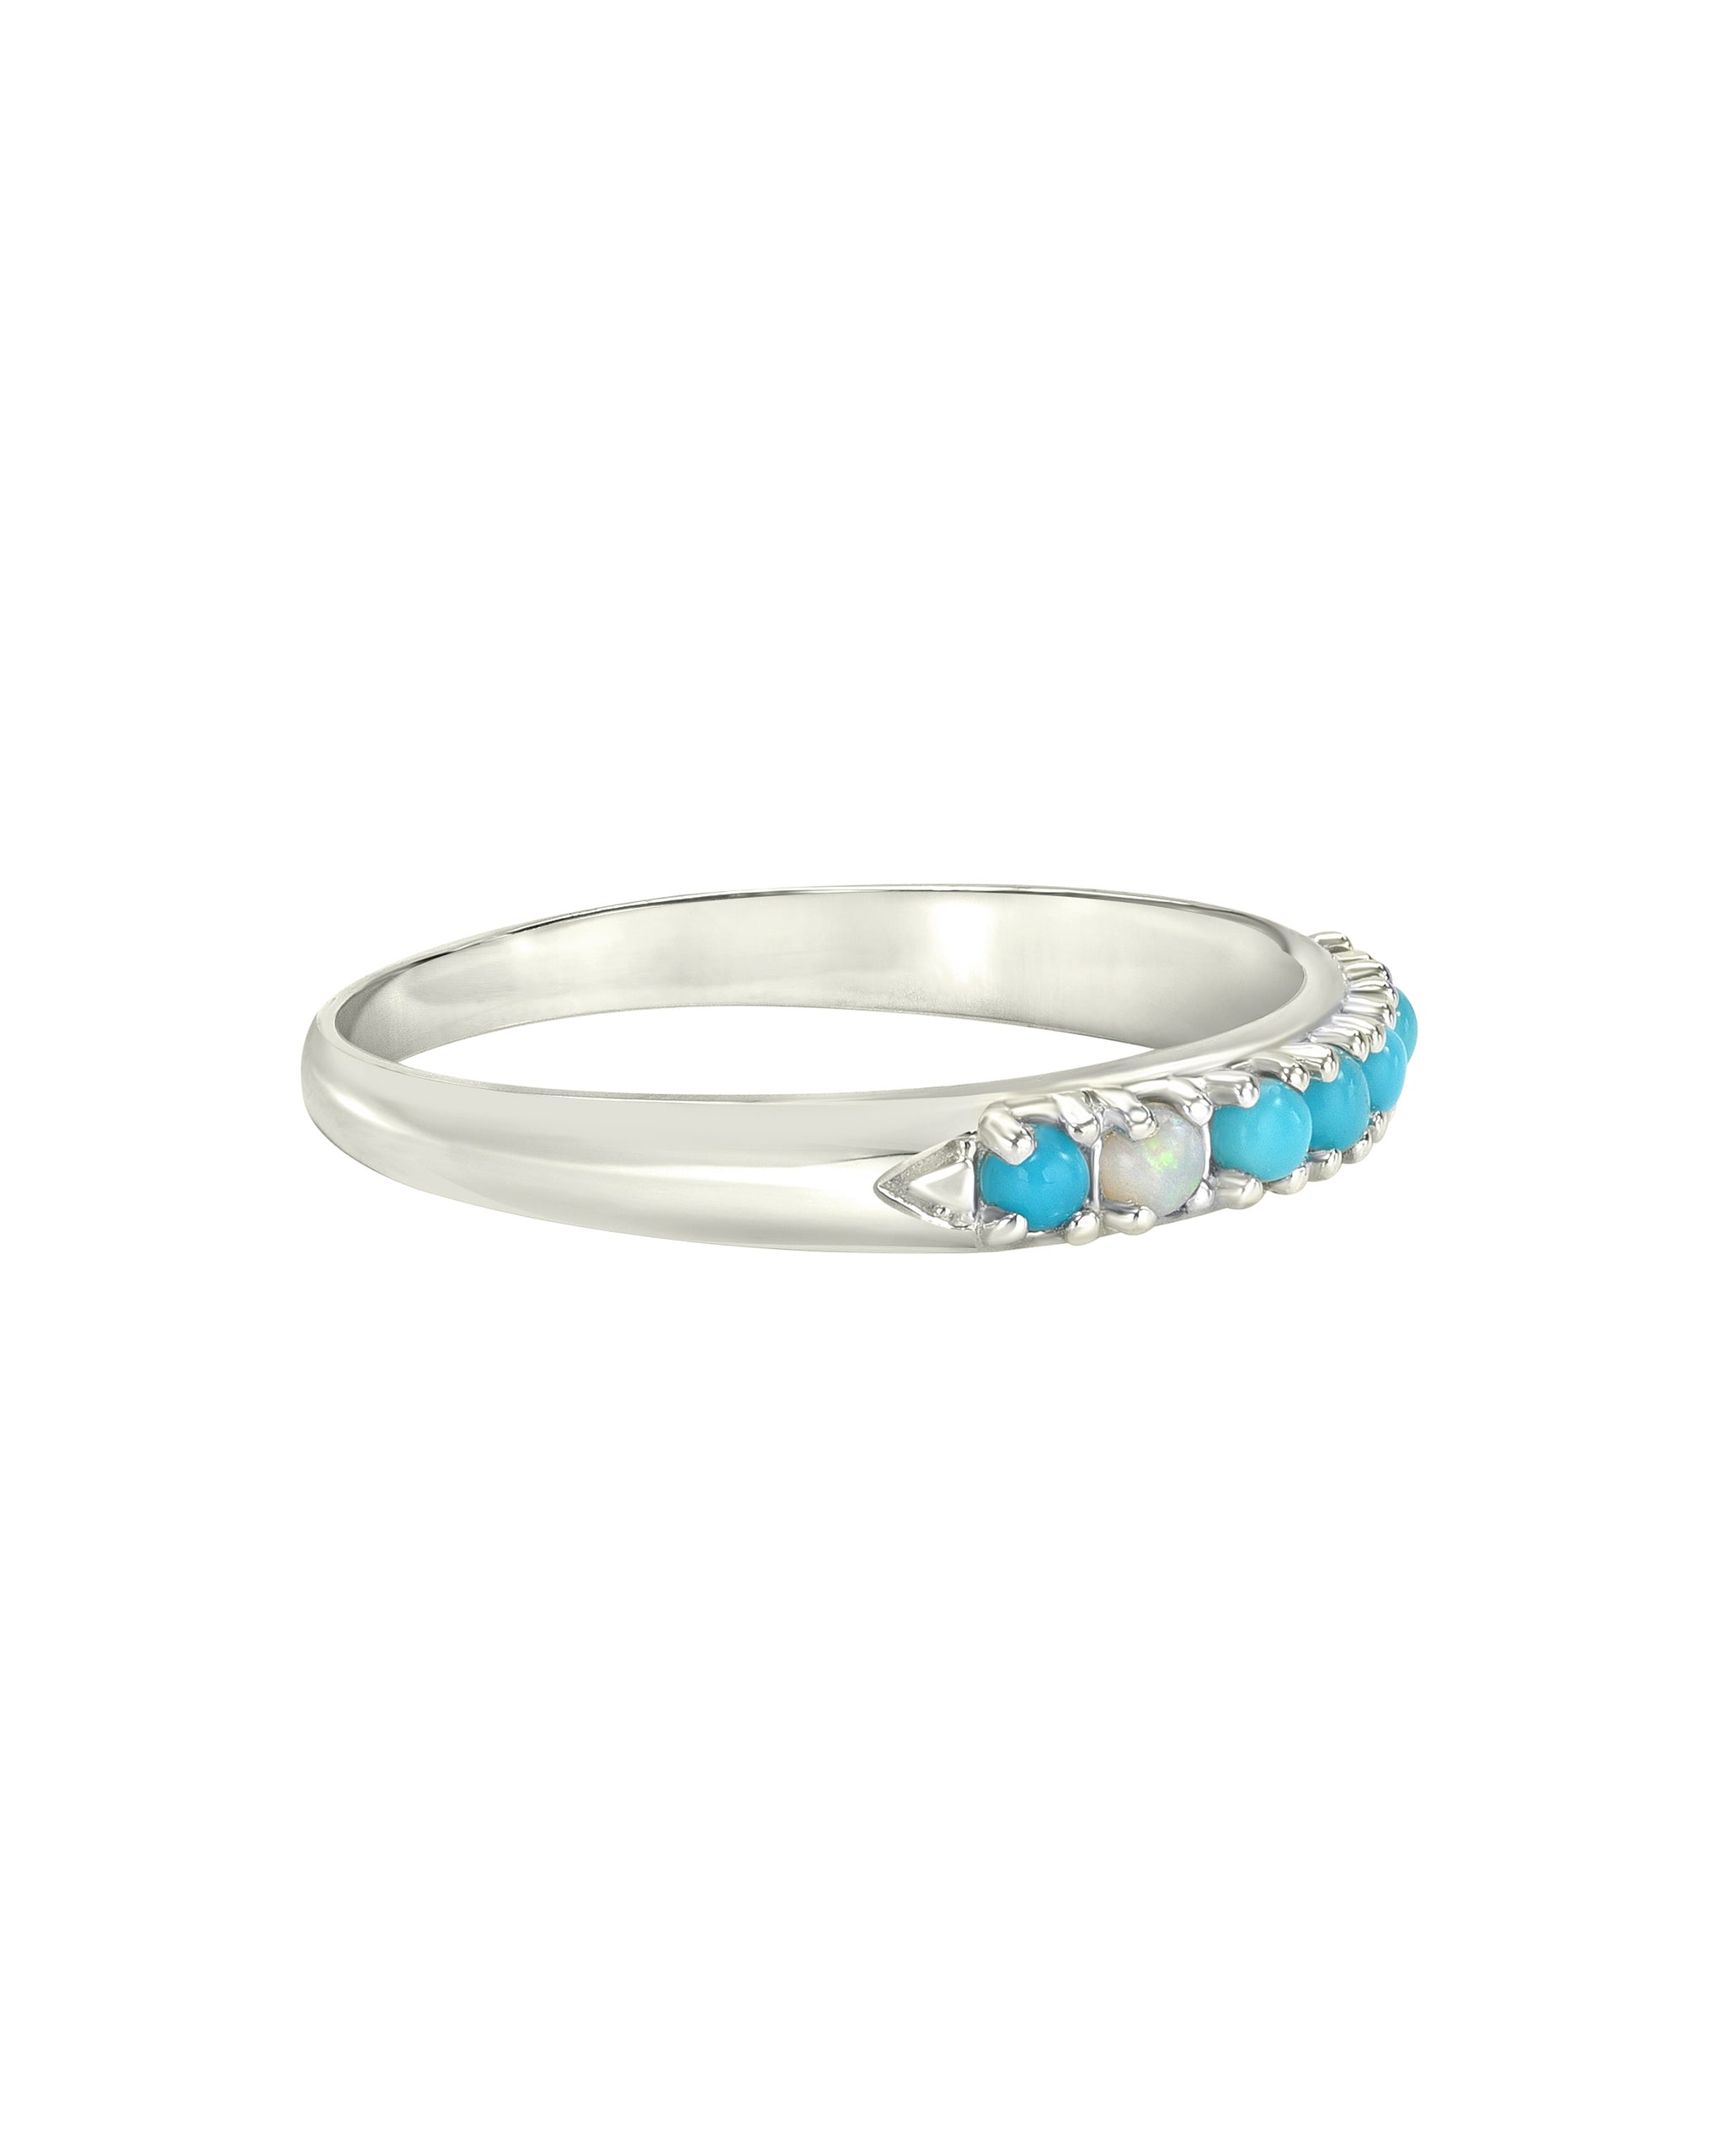 Wylde Ring, Turquoise and Opal Sterling Silver Chevron Ring, Handmade by Turquoise and Tobacco in Los Angeles California